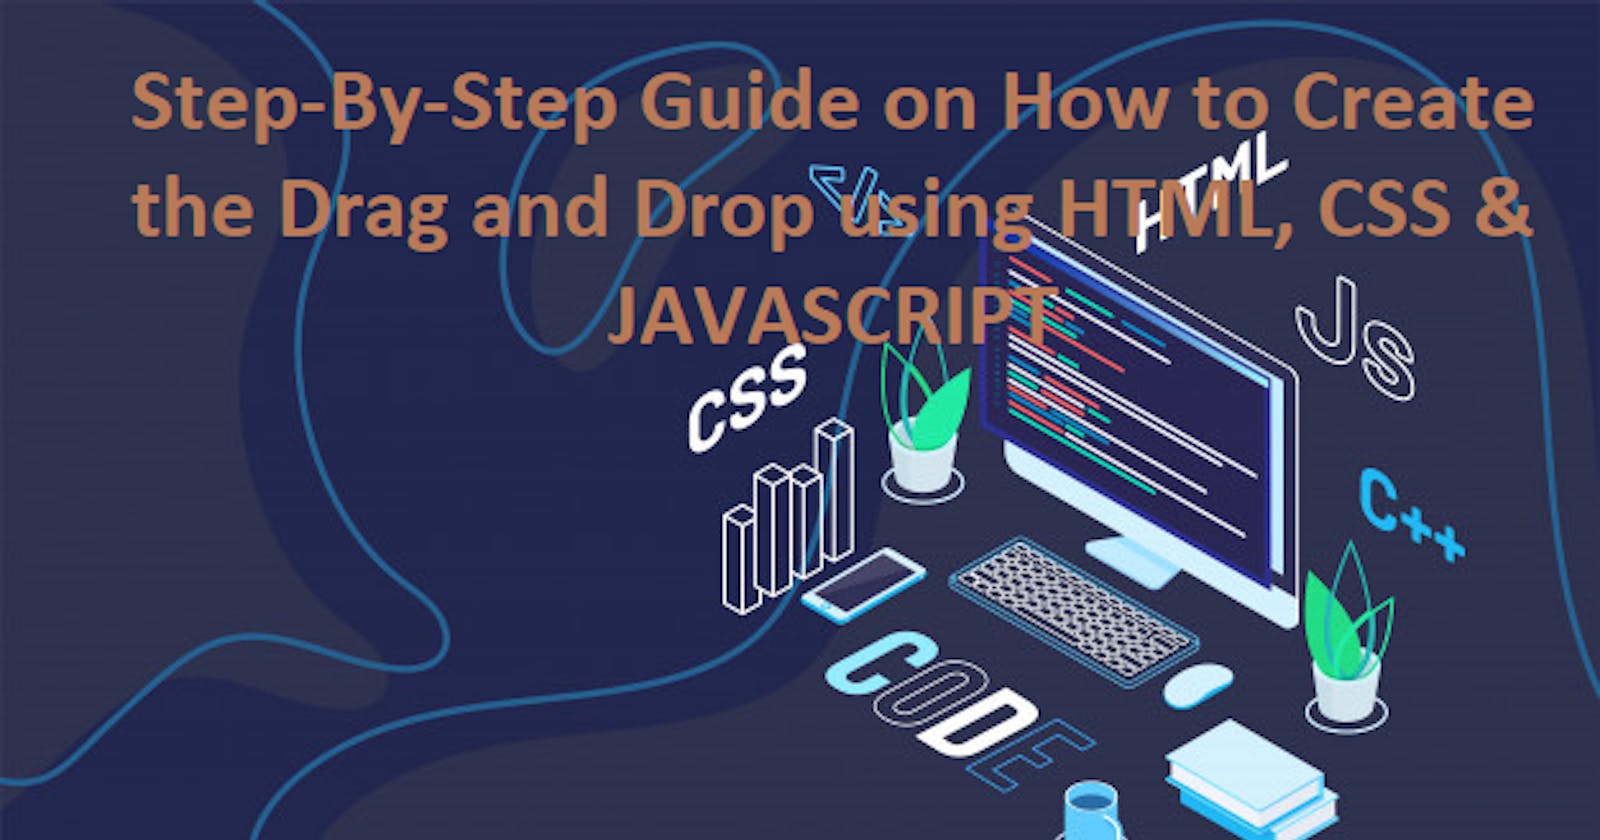 Step-By-Step Guide on How to Create the Drag and Drop using HTML, CSS & JAVASCRIPT